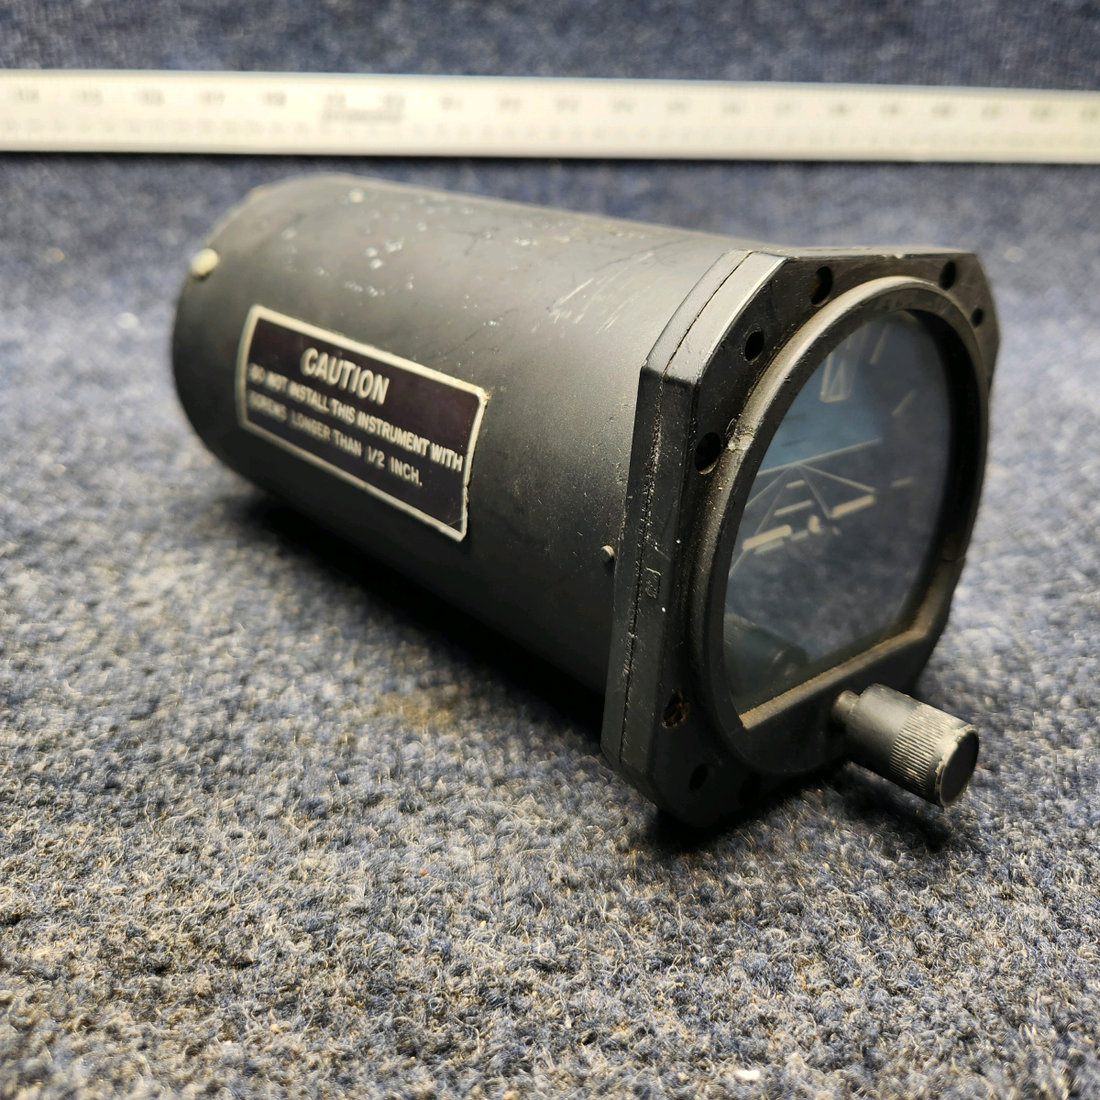 Used aircraft parts for sale, C661076-0101 PIPER PA28-140 CESSNA EDO-AIRE ATTITUDE INDICATOR GYRO